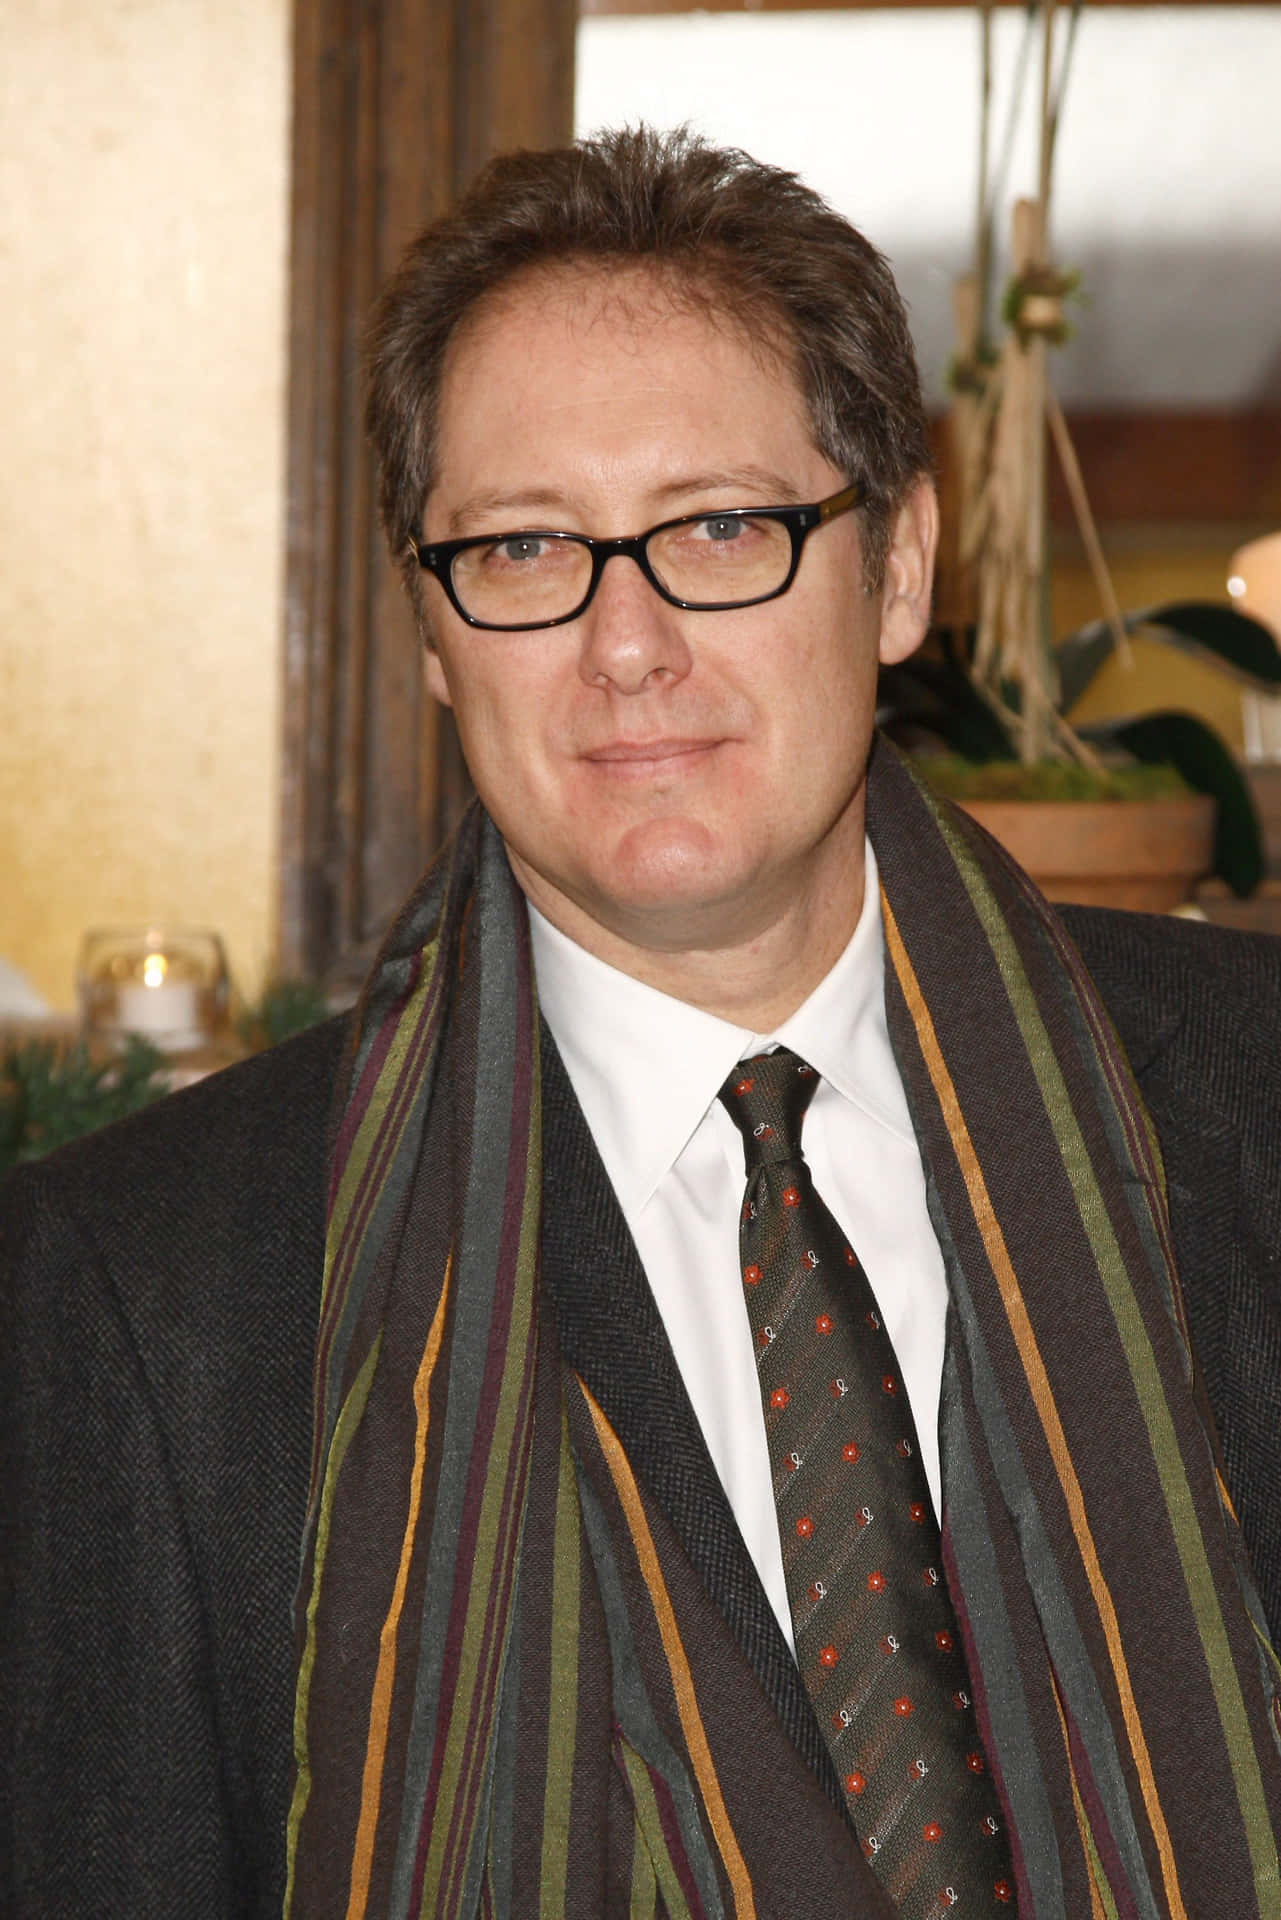 Caption: Acclaimed Actor James Spader In A Charming Black And White Portrait.